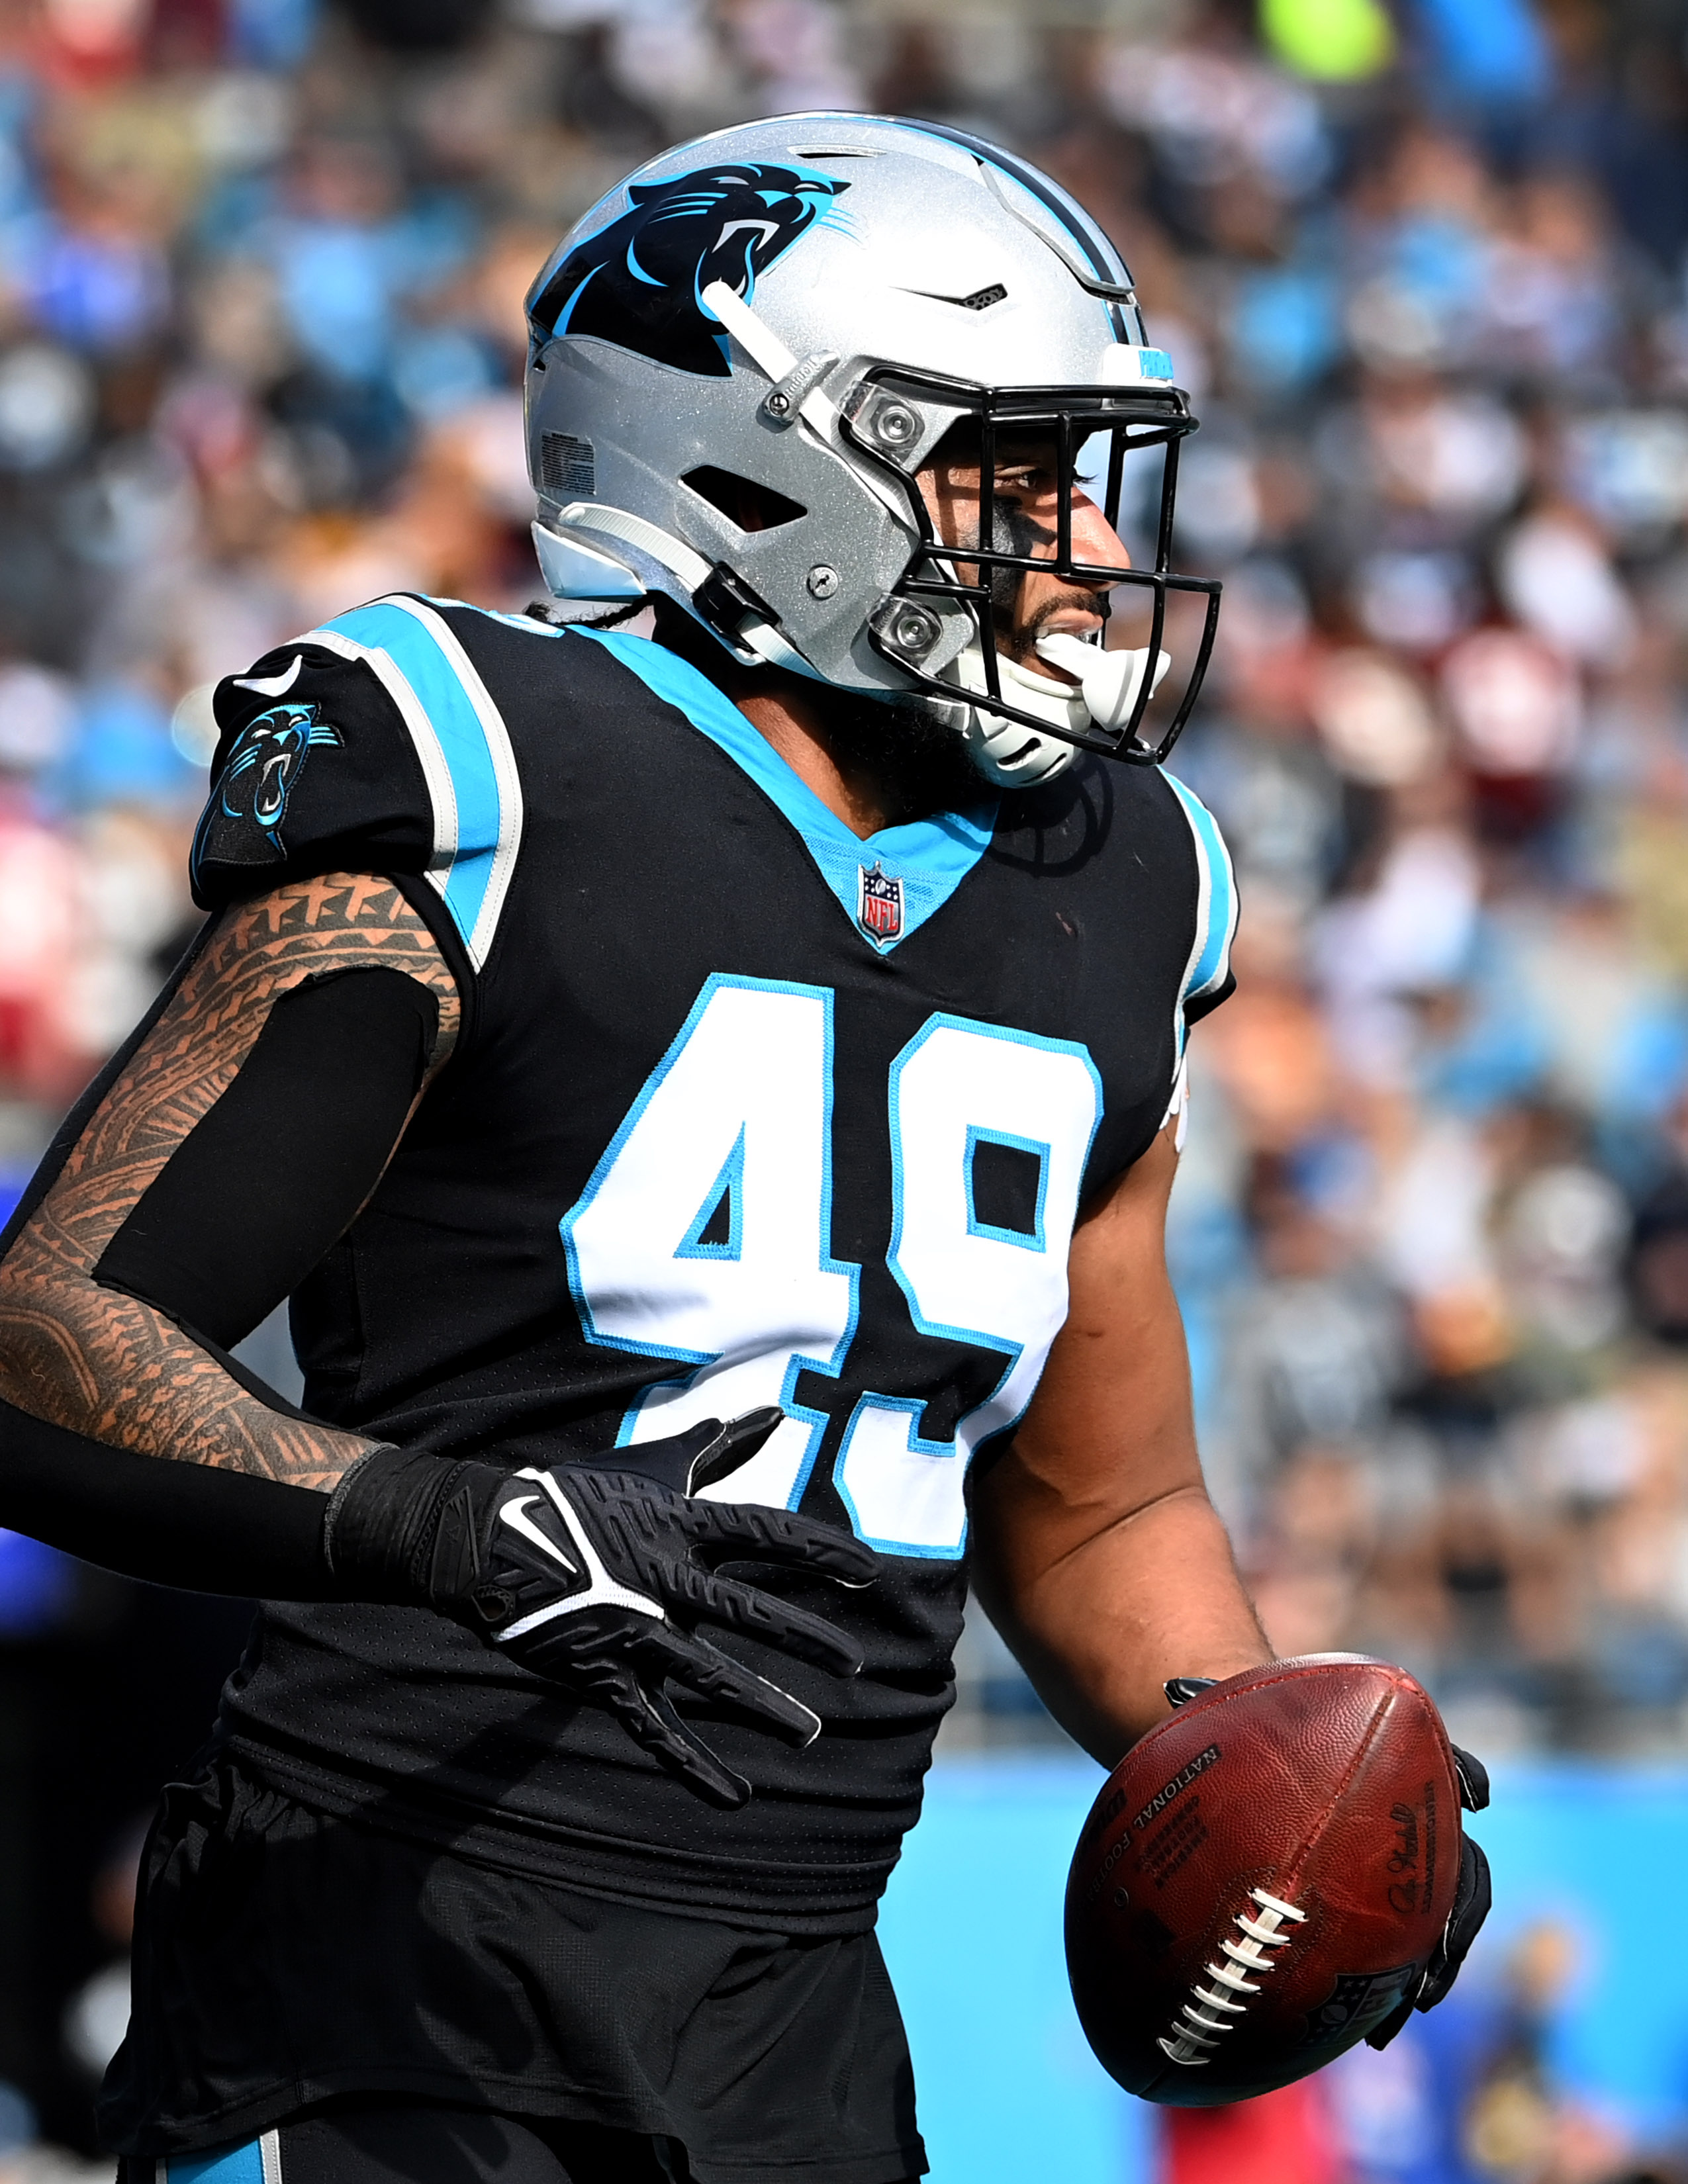 Panthers LB Frankie Luvu To Expand Role In 2022